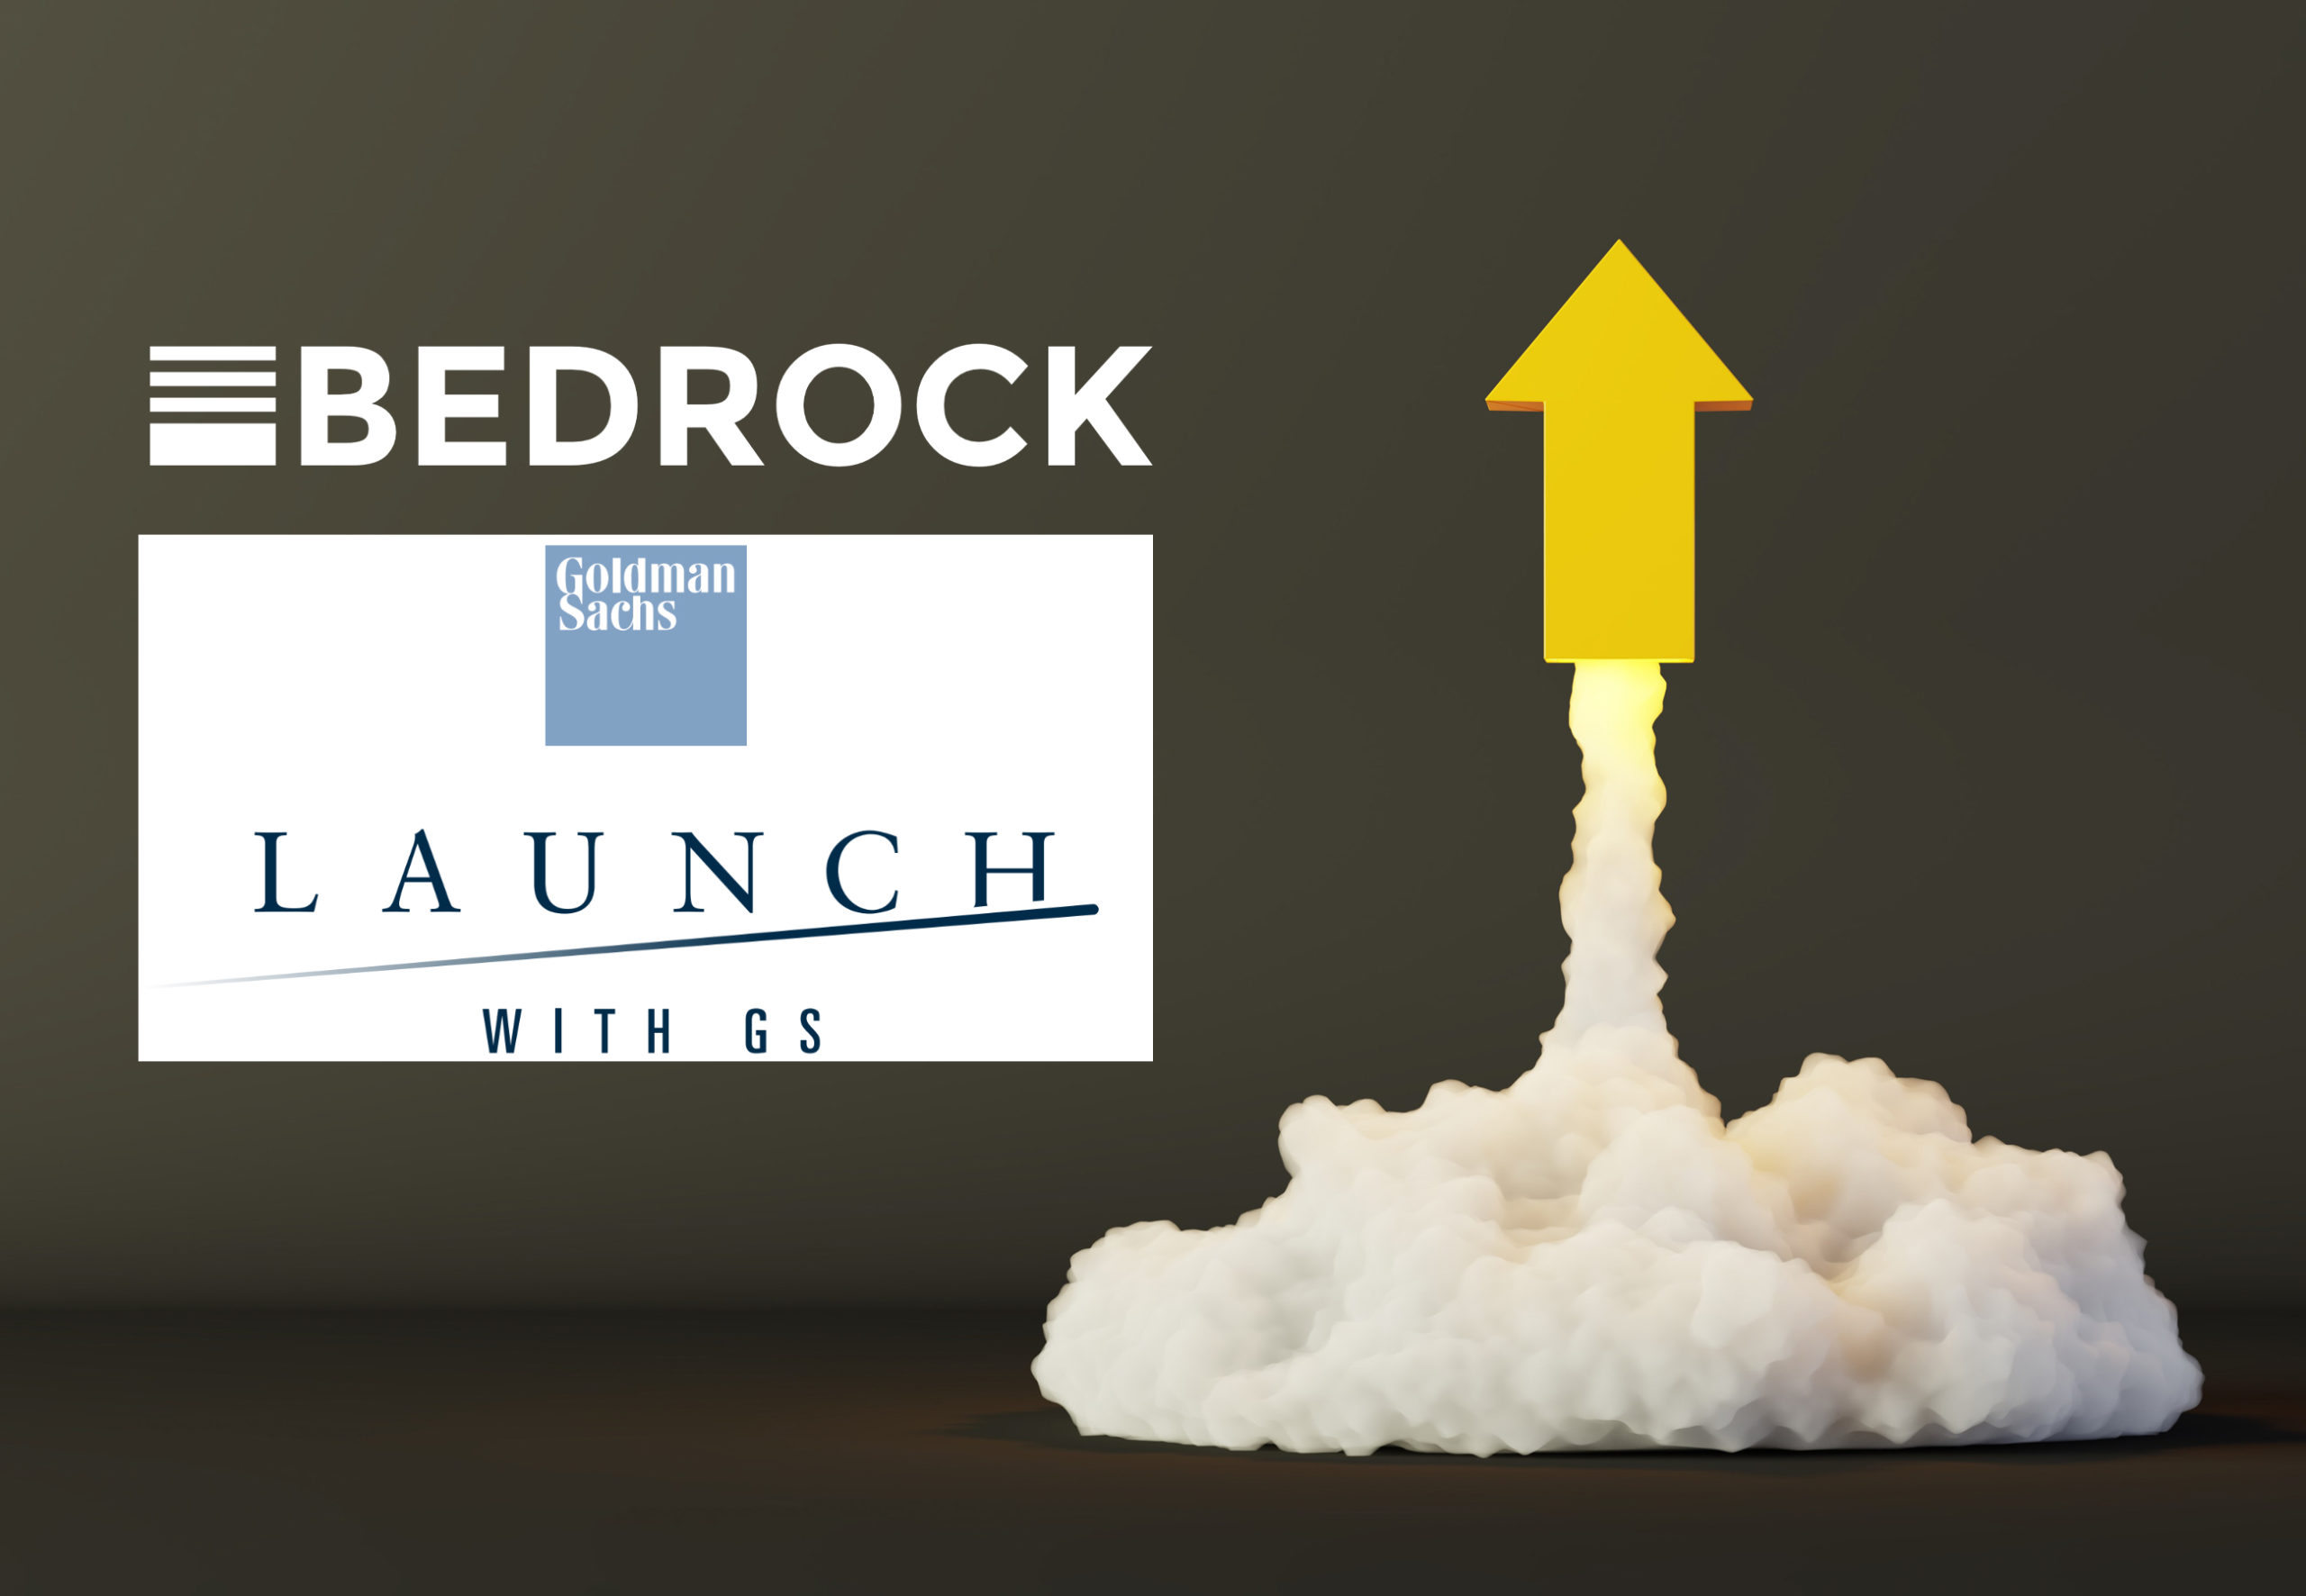 Bedrock co-founder and CEO, Will Salcido, has been selected for the Goldman Sachs Launch With GS Black and Latinx Entrepreneur Cohort.